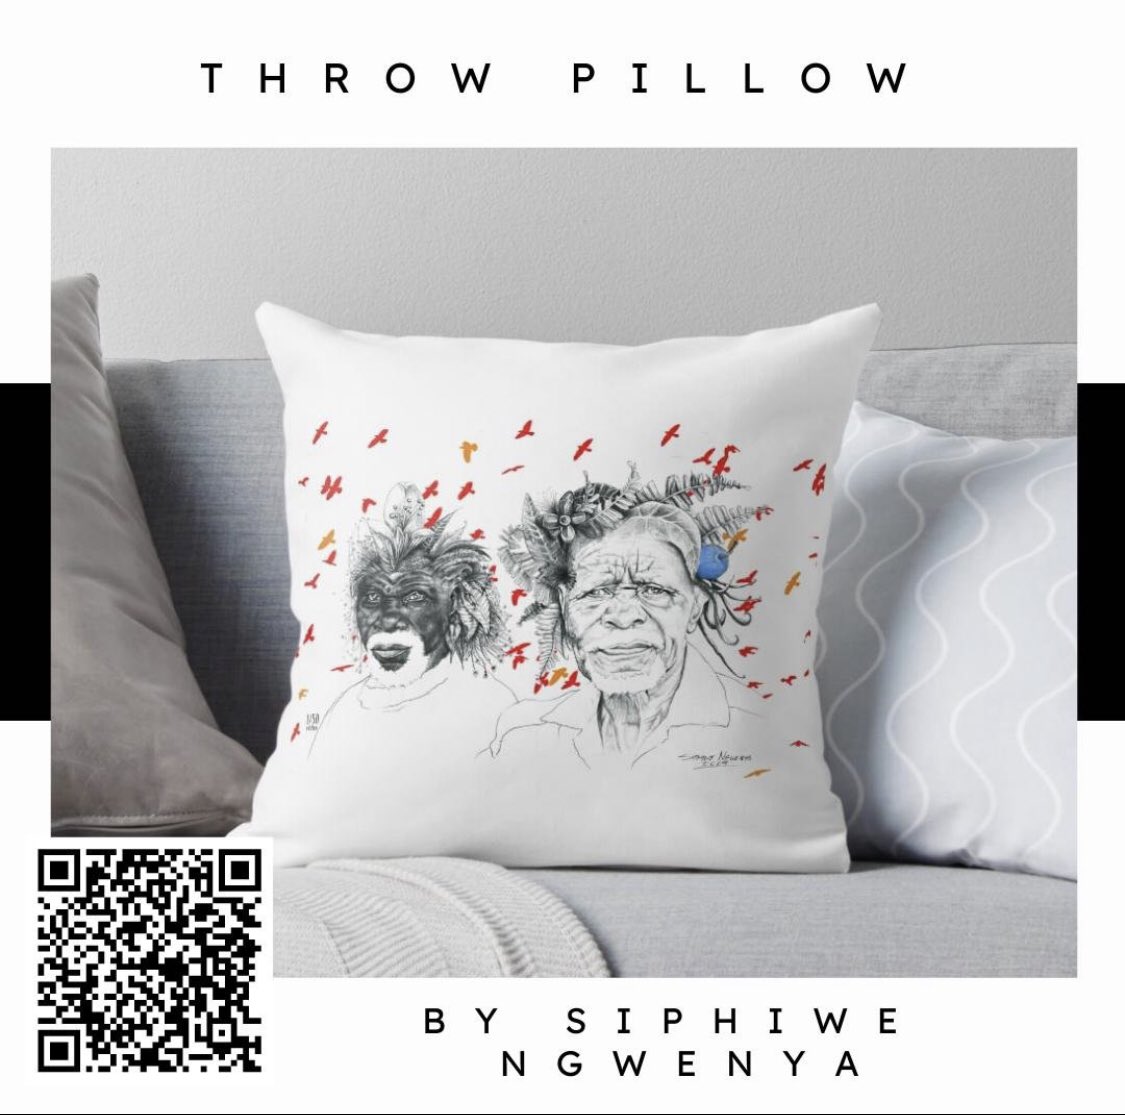 Update your living space with this SunMen with the Birds throw pillow - its vibrant design will brighten up any space. Scan the QR code to shop! @visitjoburg @visitgauteng @visitsouthafrica #MabonengTownshipArtsExperience#ArtVenturousConference #TownshipArts